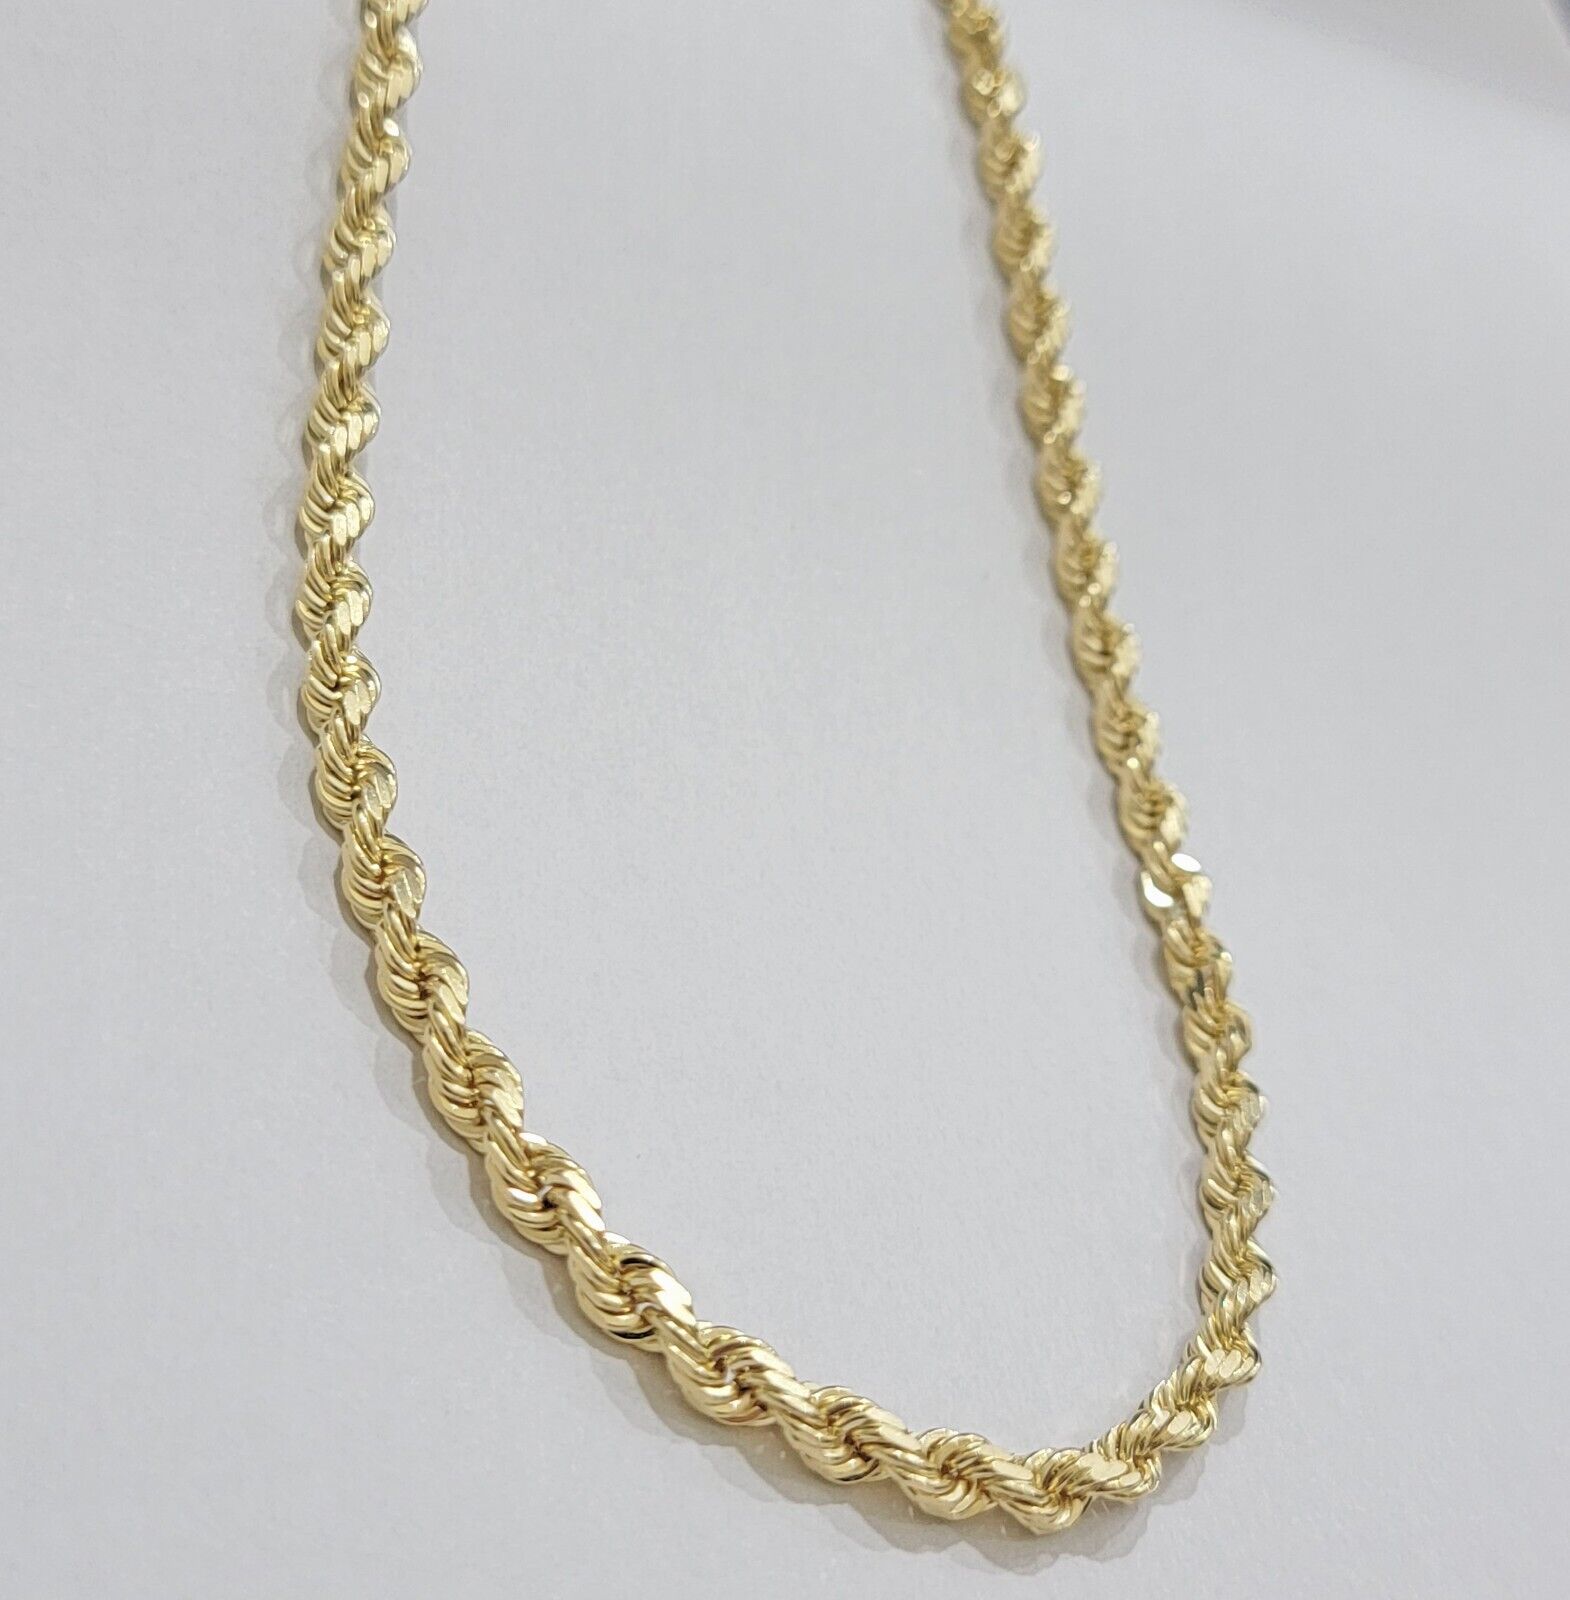 Real 14k Yellow Gold Rope Chain Necklace 4.5mm 18- 26 Inch Diamond Cut SOLID 14K